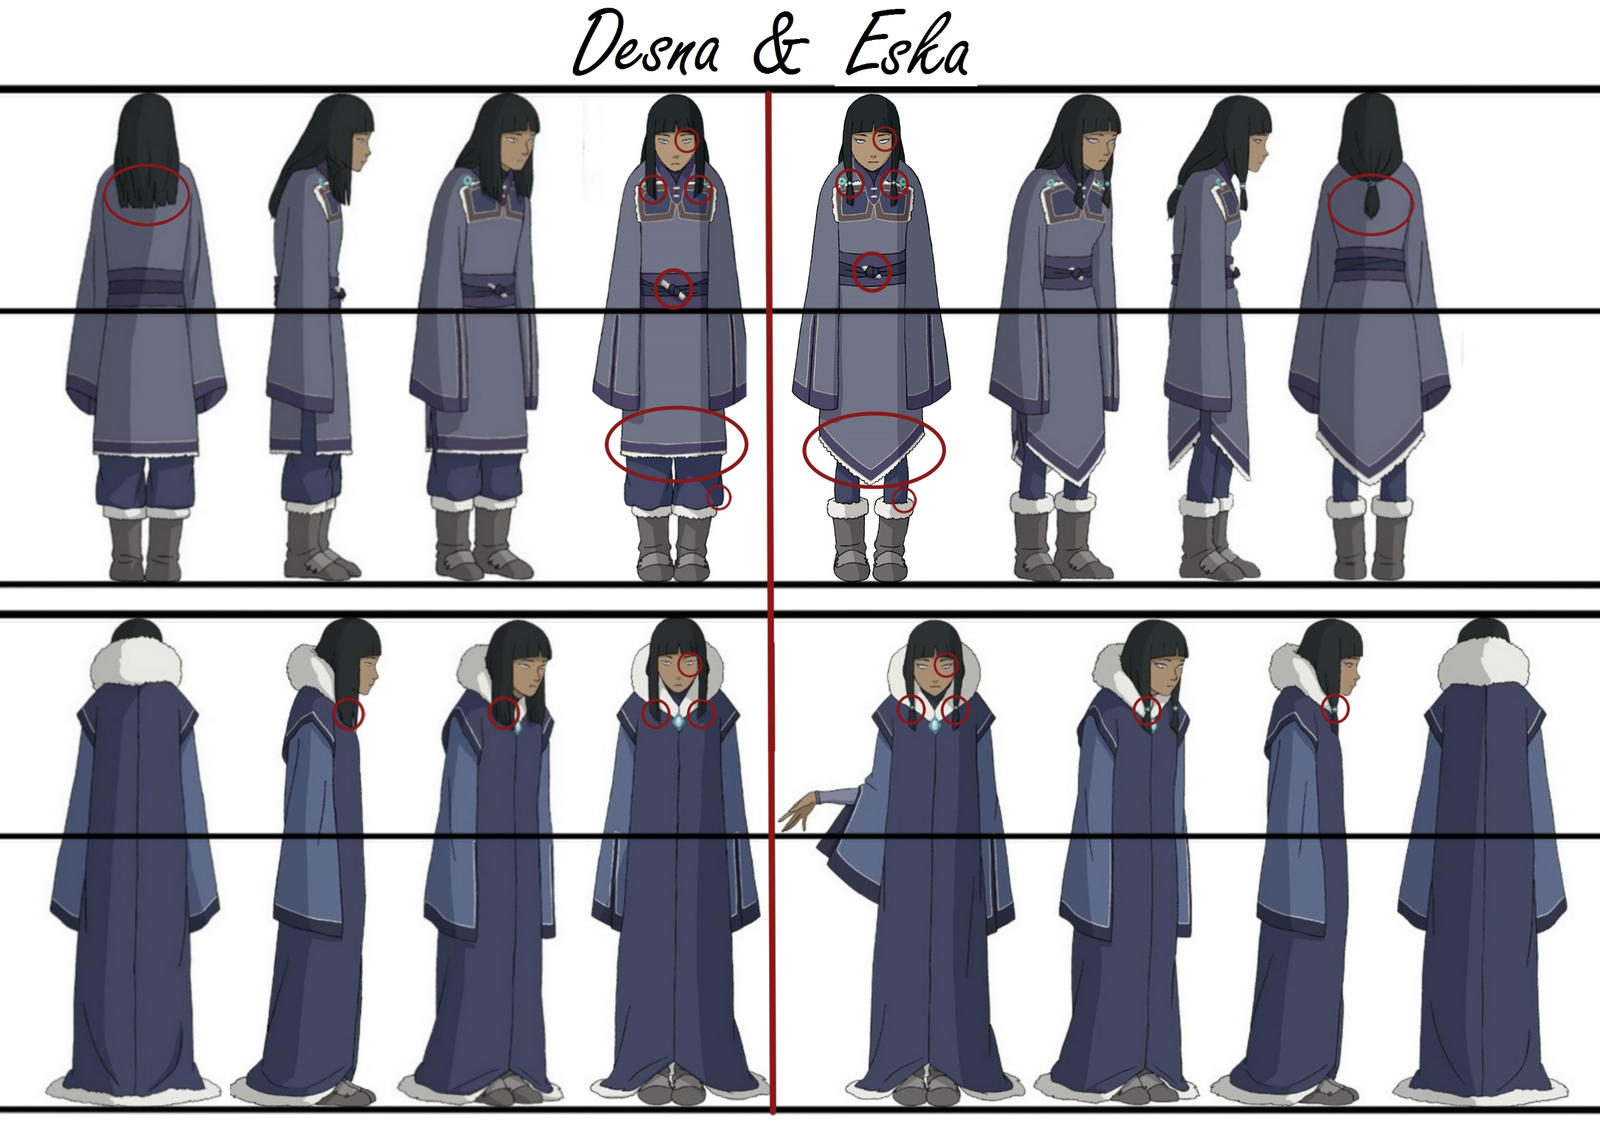 desna-and-eska-differences-by-pistol-paintbrush493-on-deviantart